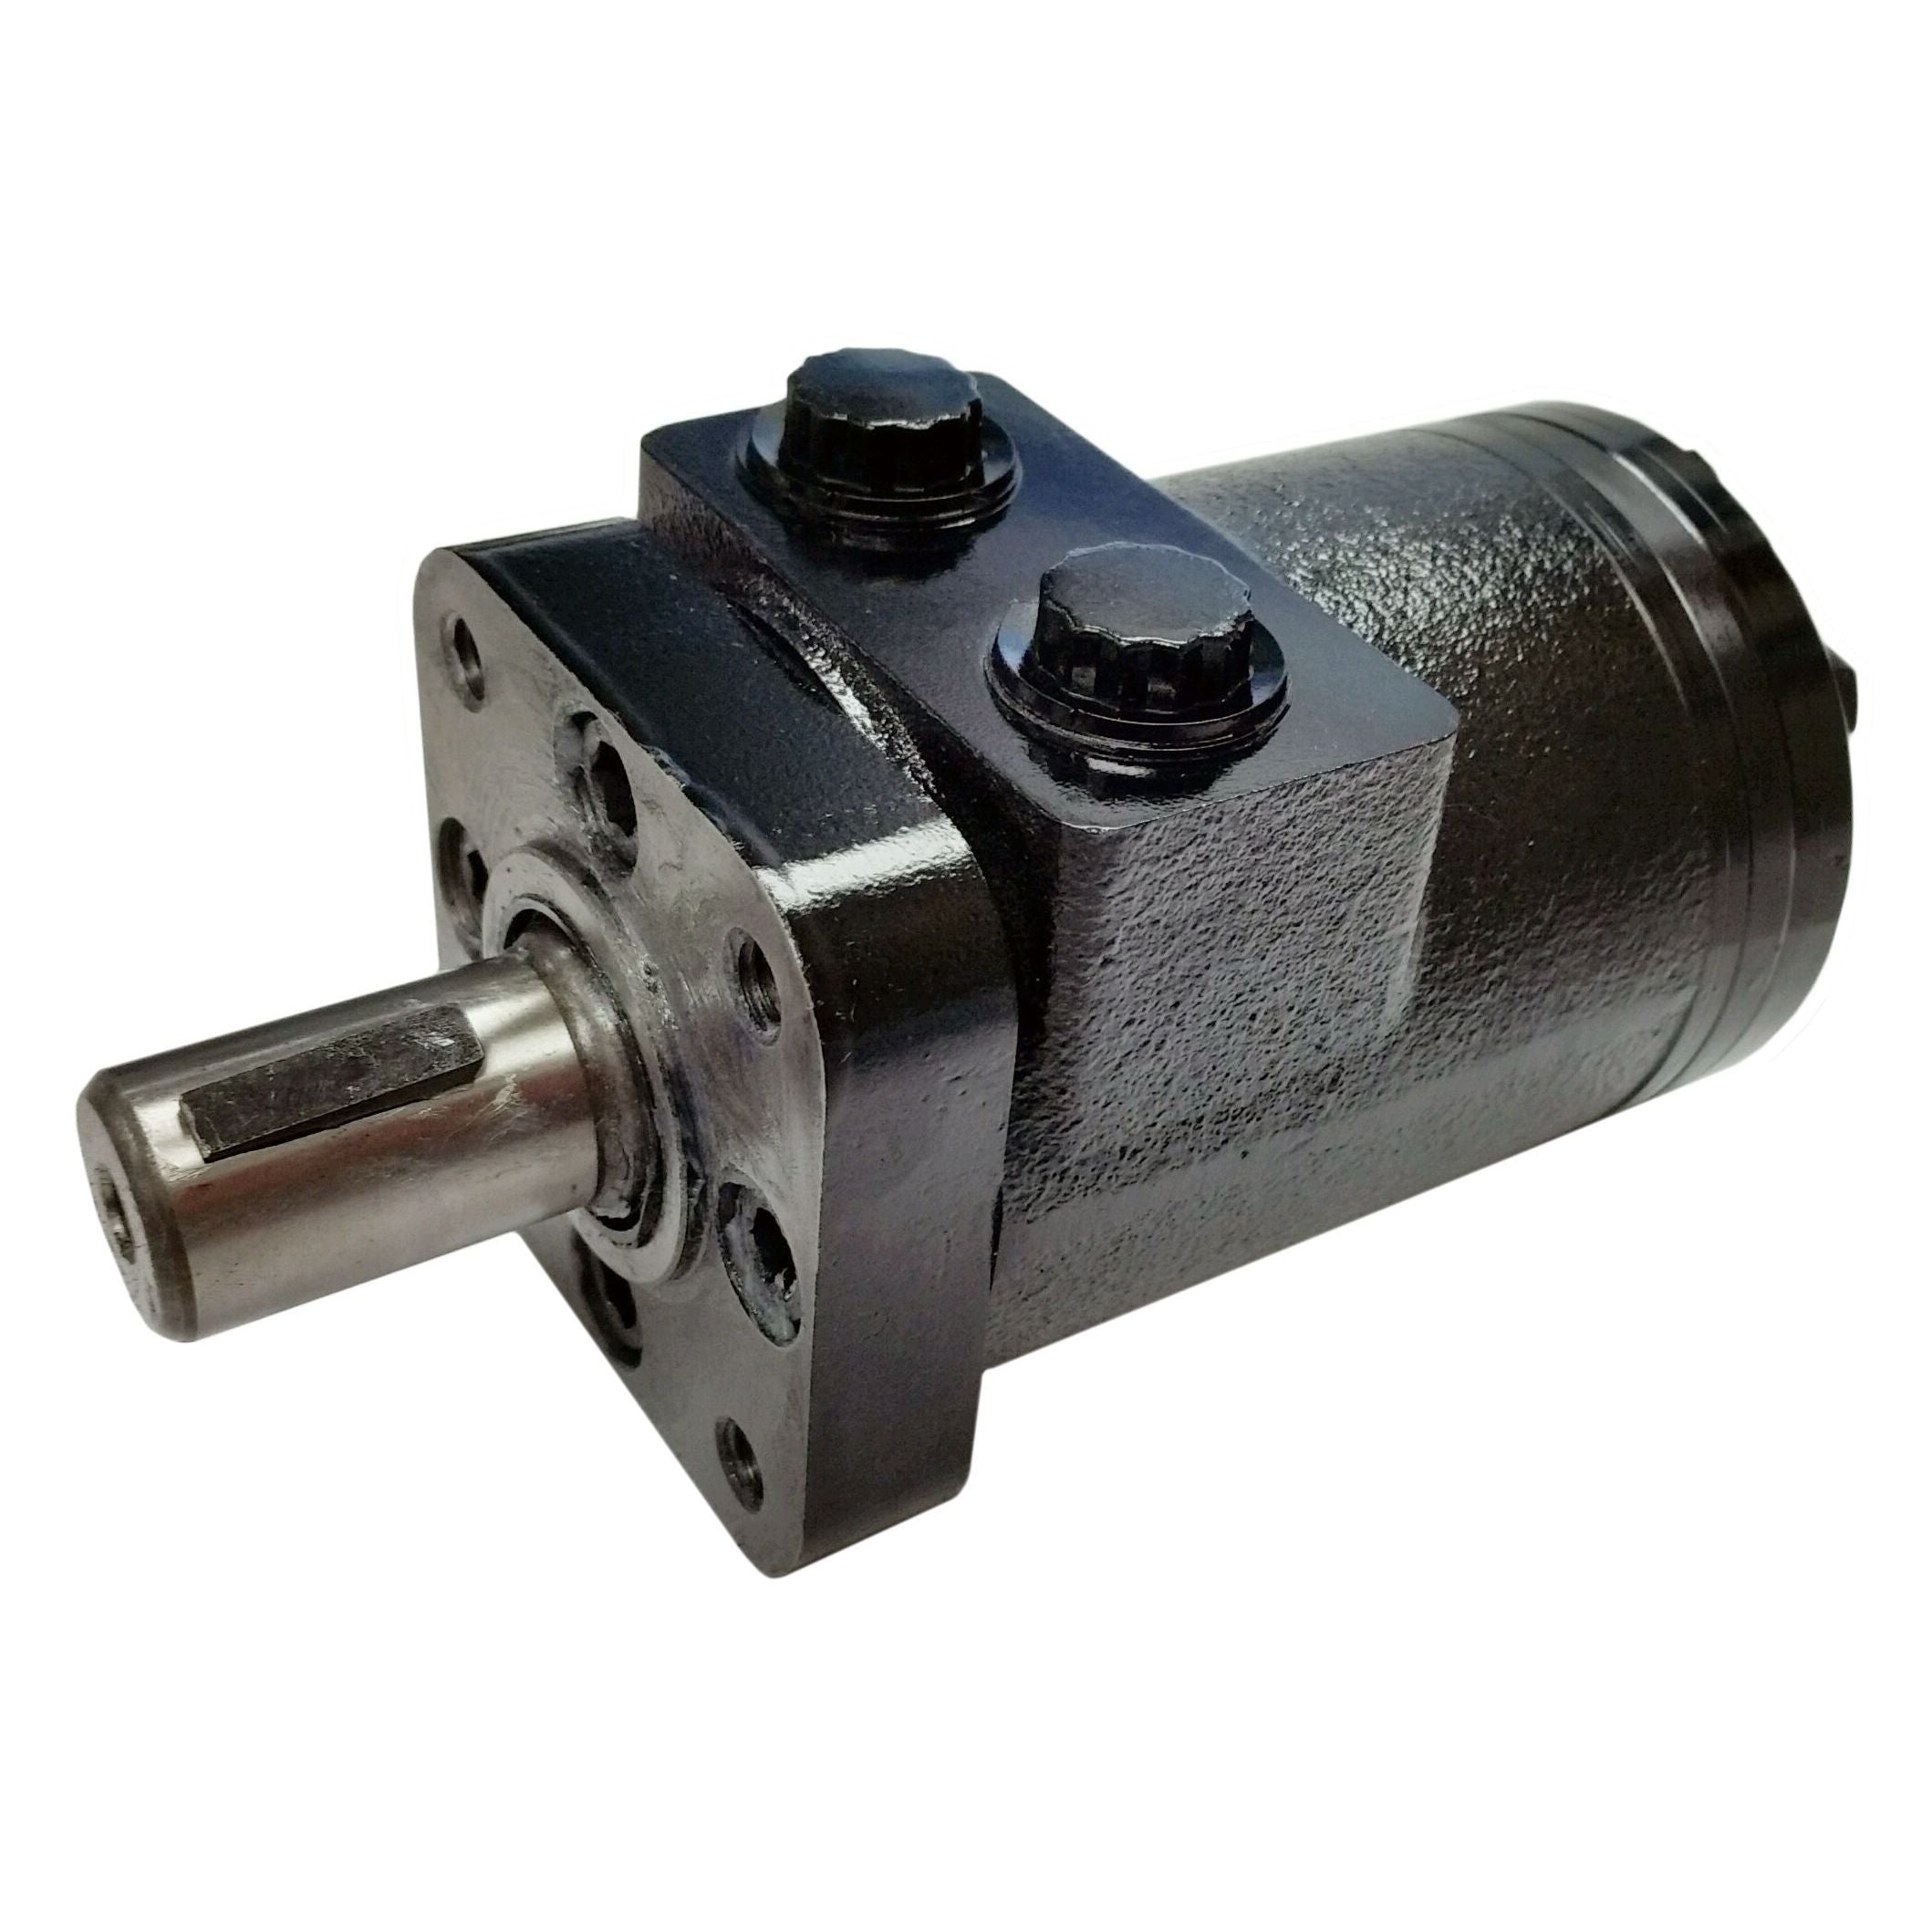 BMPH-160-H4-S-F : Dynamic LSHT Motor, 157cc, 383RPM, 2673in-lb, 2031psi Differential, 15.85GPM, SAE A 4-Bolt Mount, 6-Tooth Shaft, Side Ported, Manifold